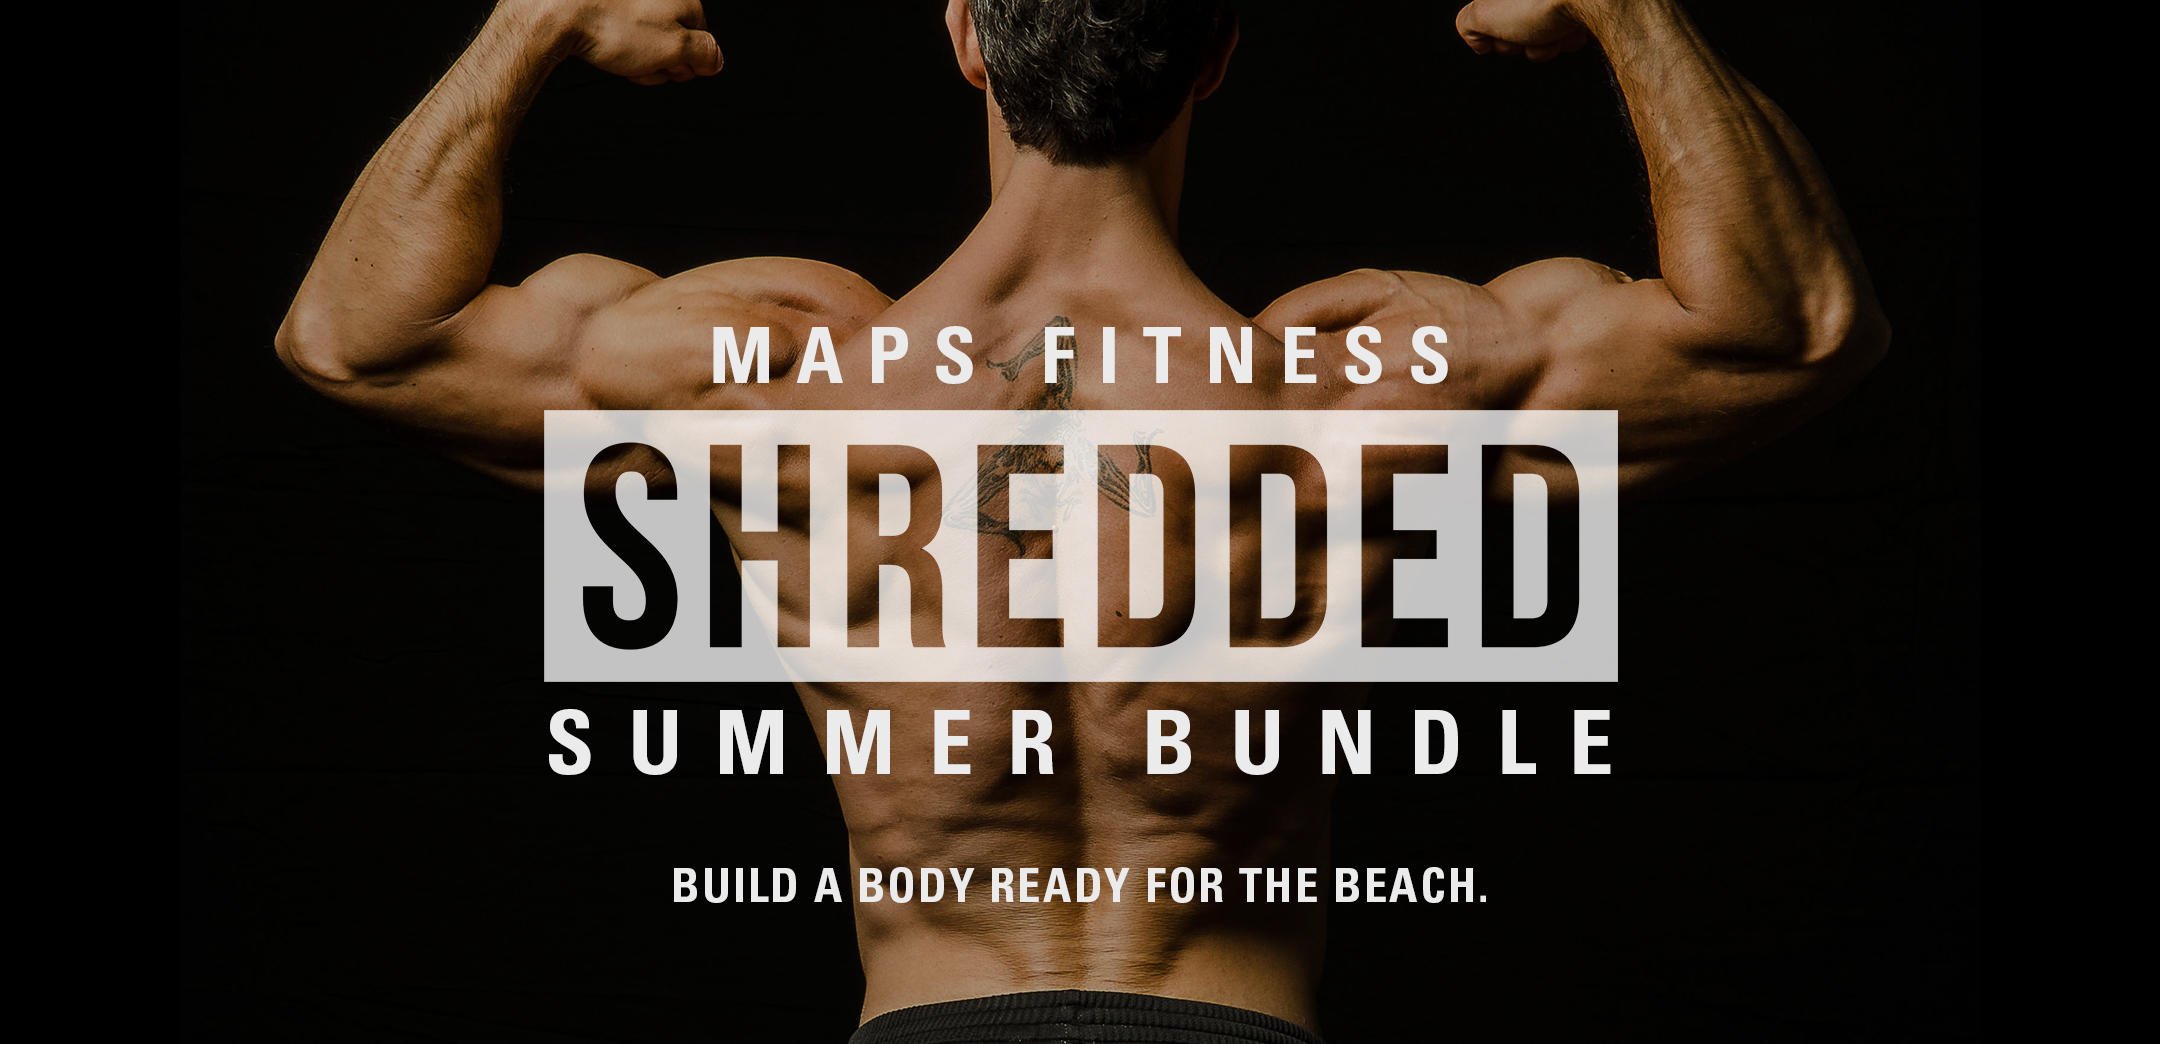 MAPS Fitness Products Shredded Summer Bundle